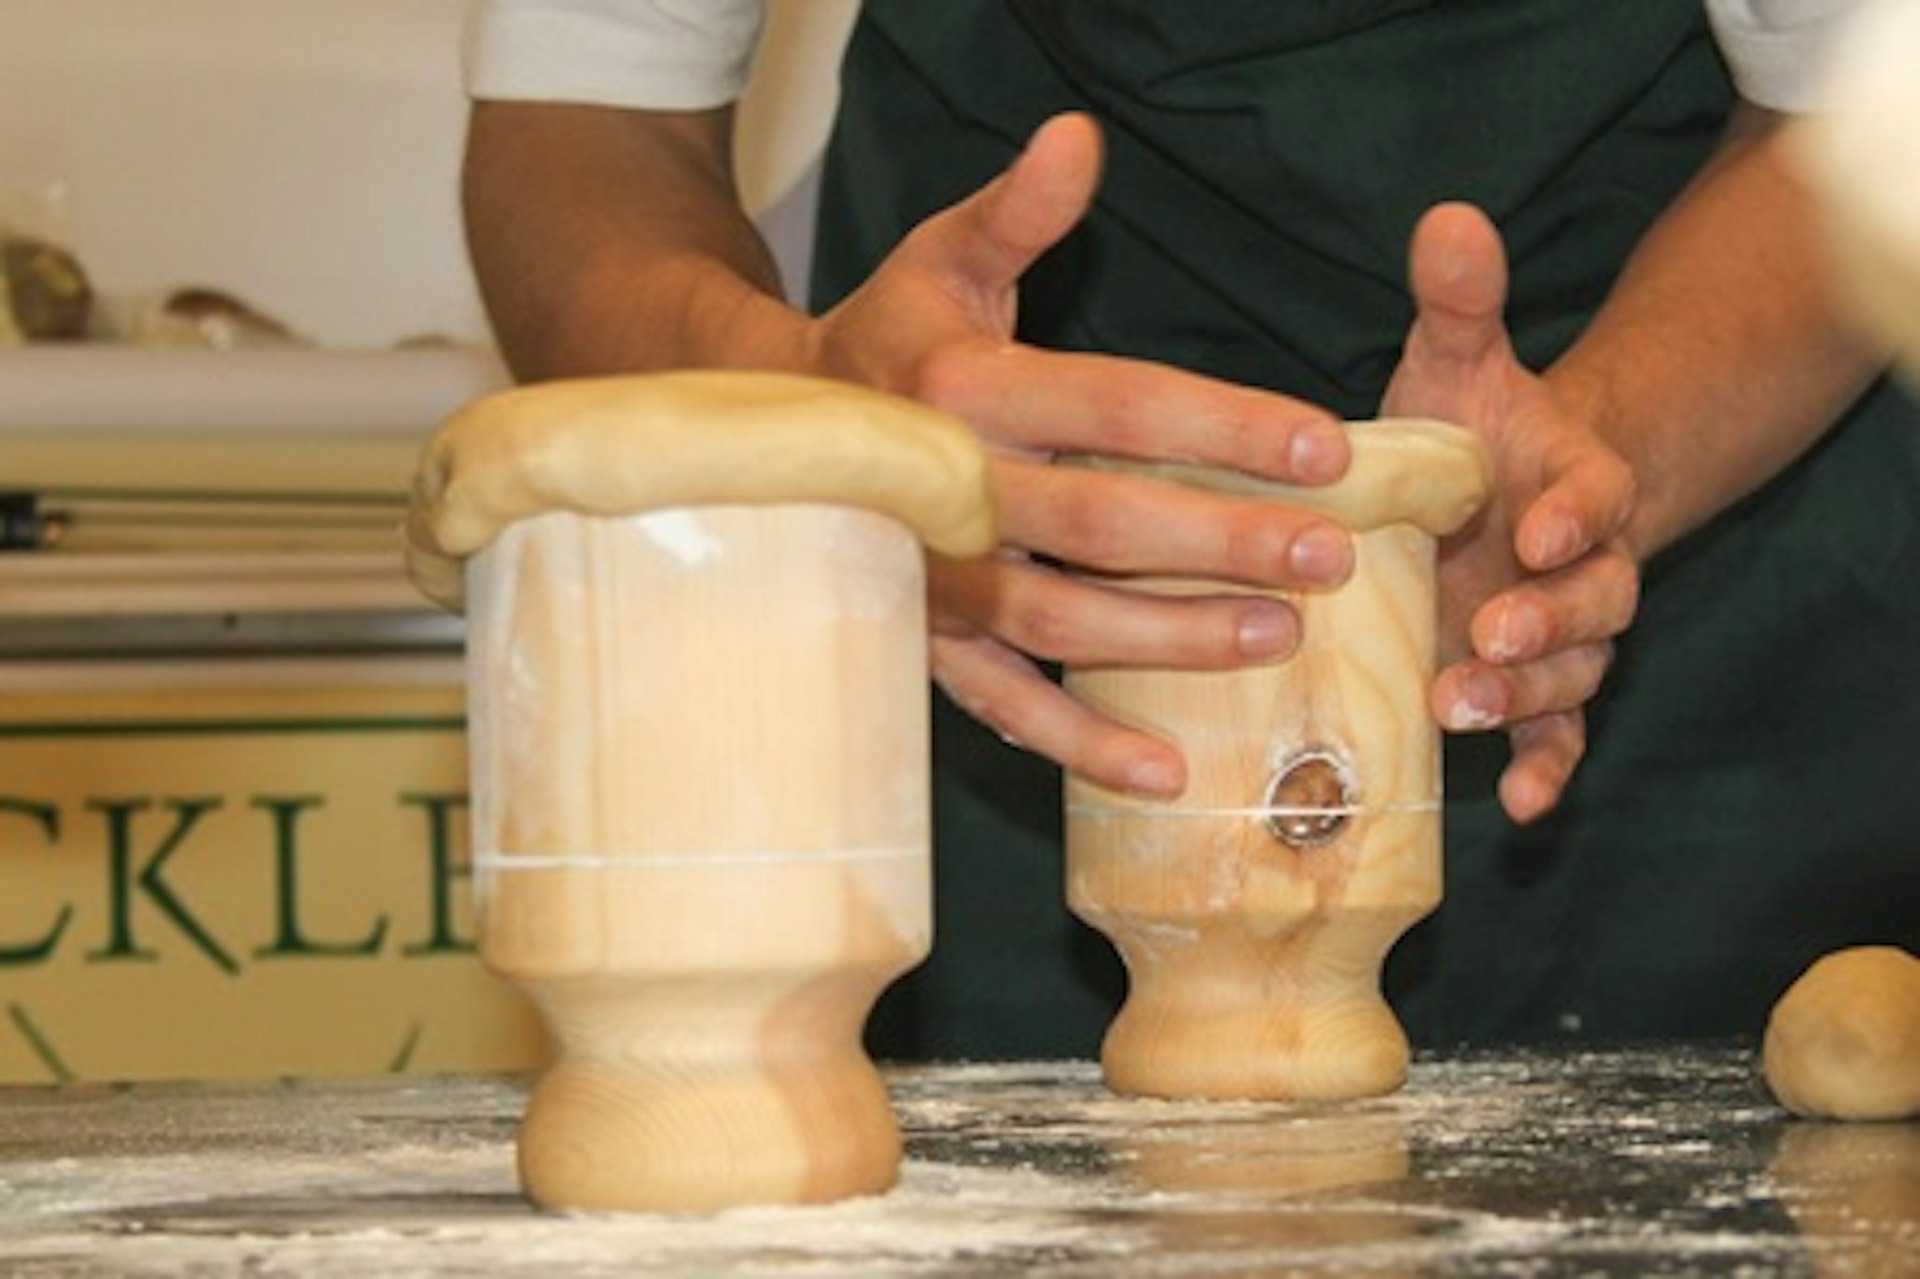 Pork Pie Making Workshop with Ploughman's Lunch for Two at Brockleby's Bakery, Melton Mowbray 3